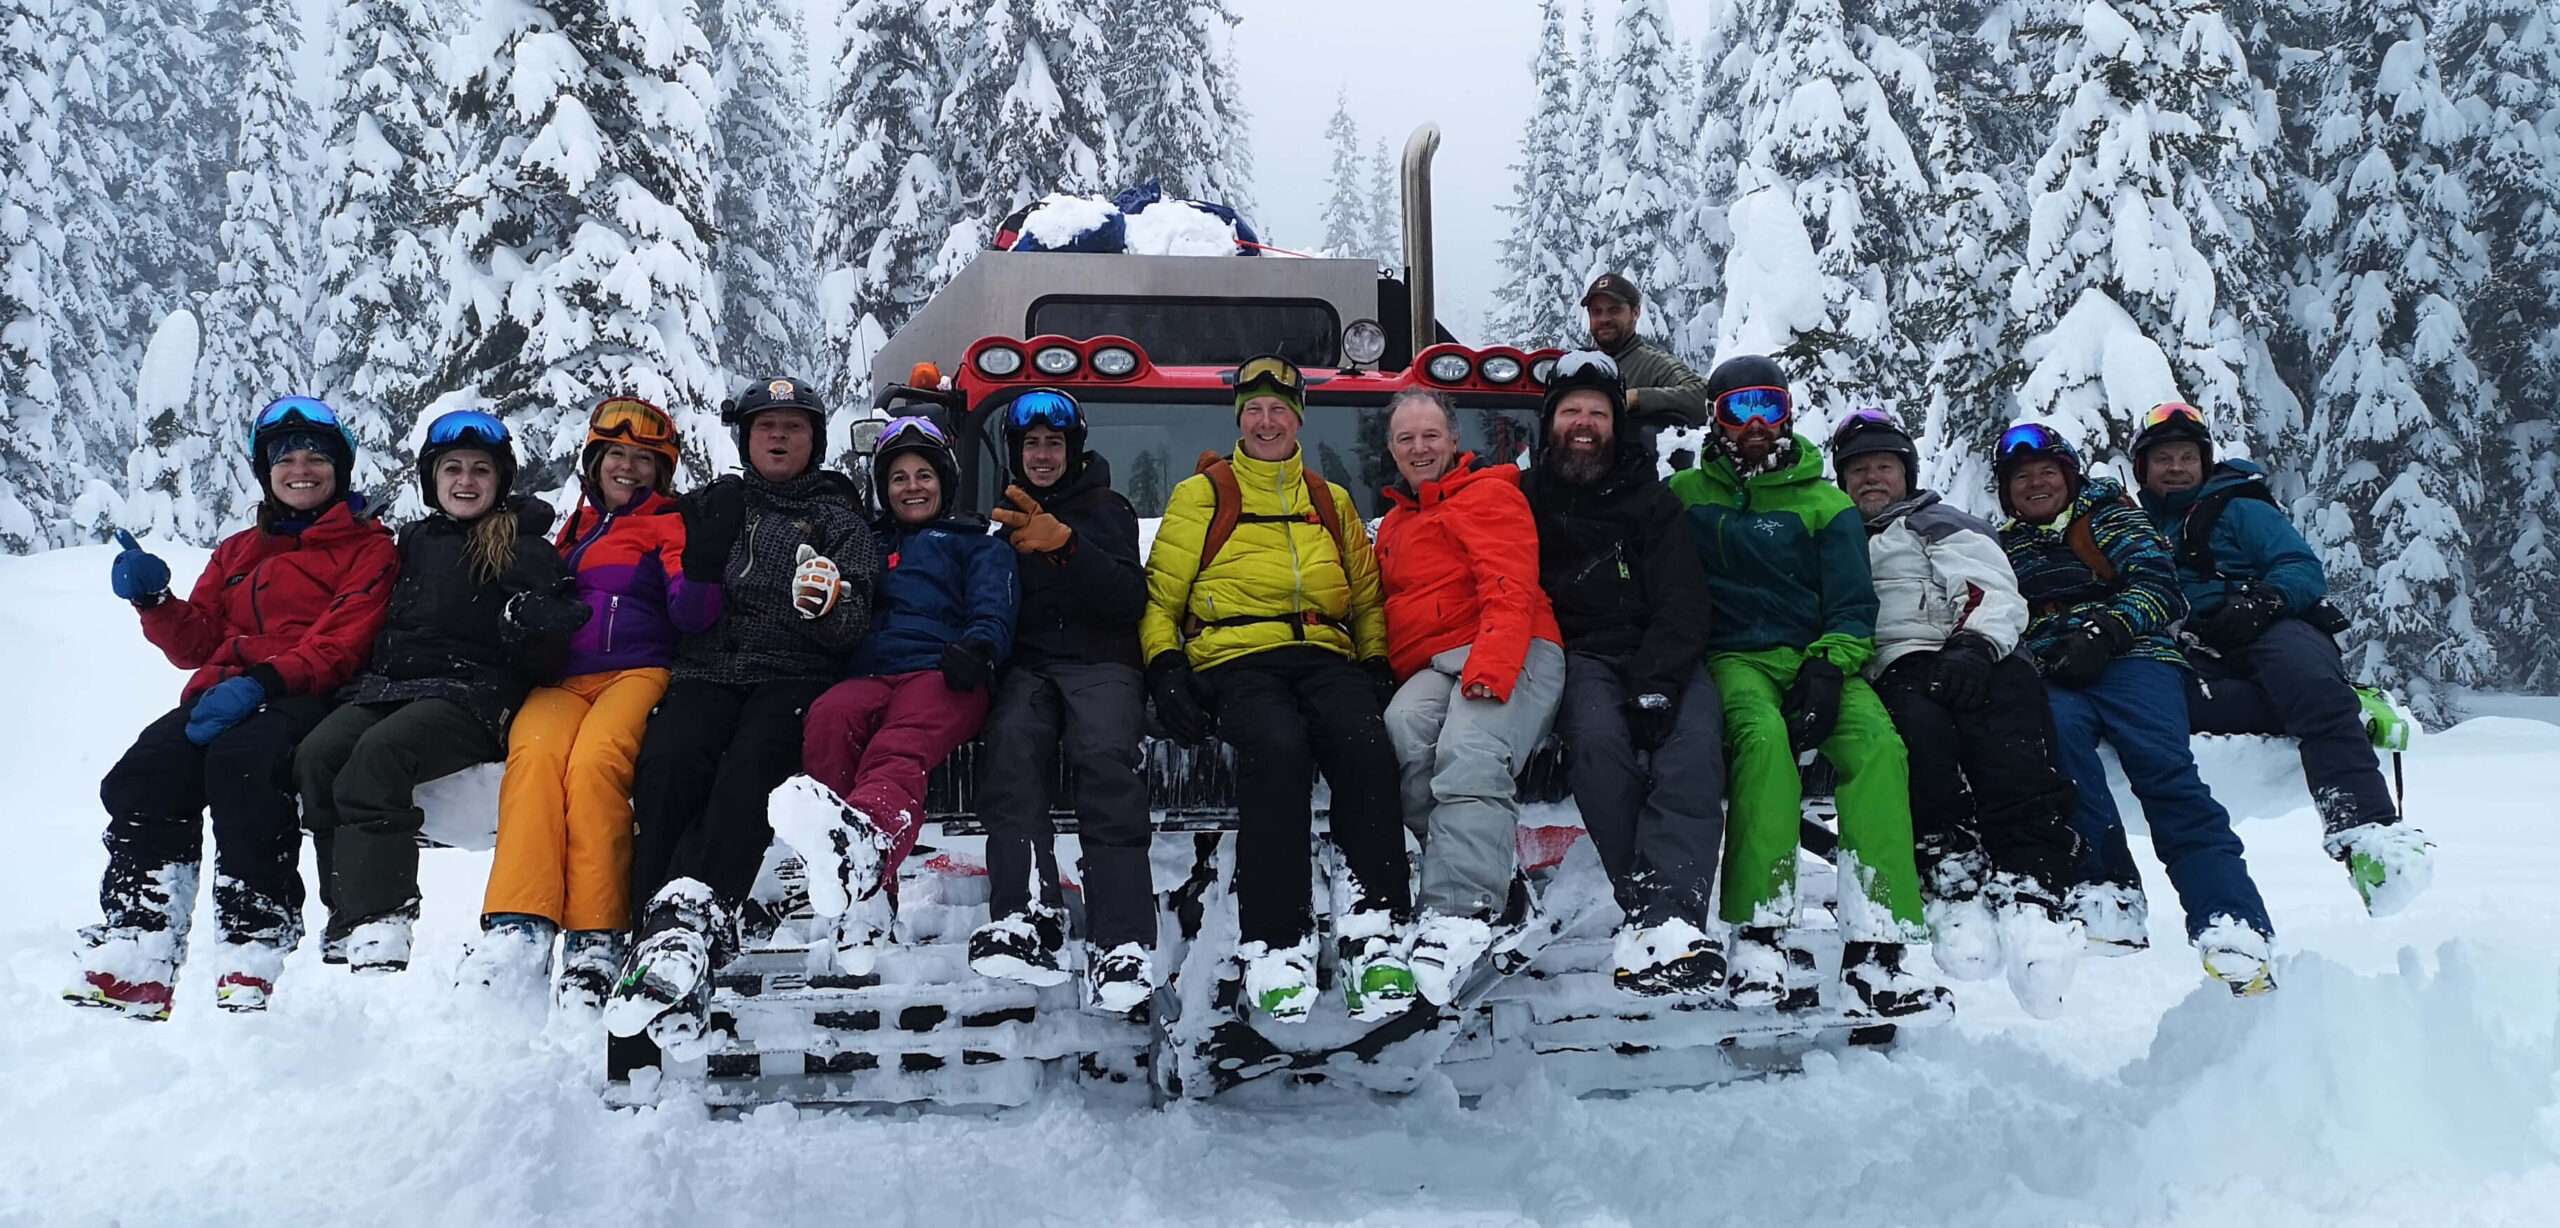 A large group of cat skiers posing by a cat machine for K3 Cat Ski on a snowy day with snow covered trees in the background.